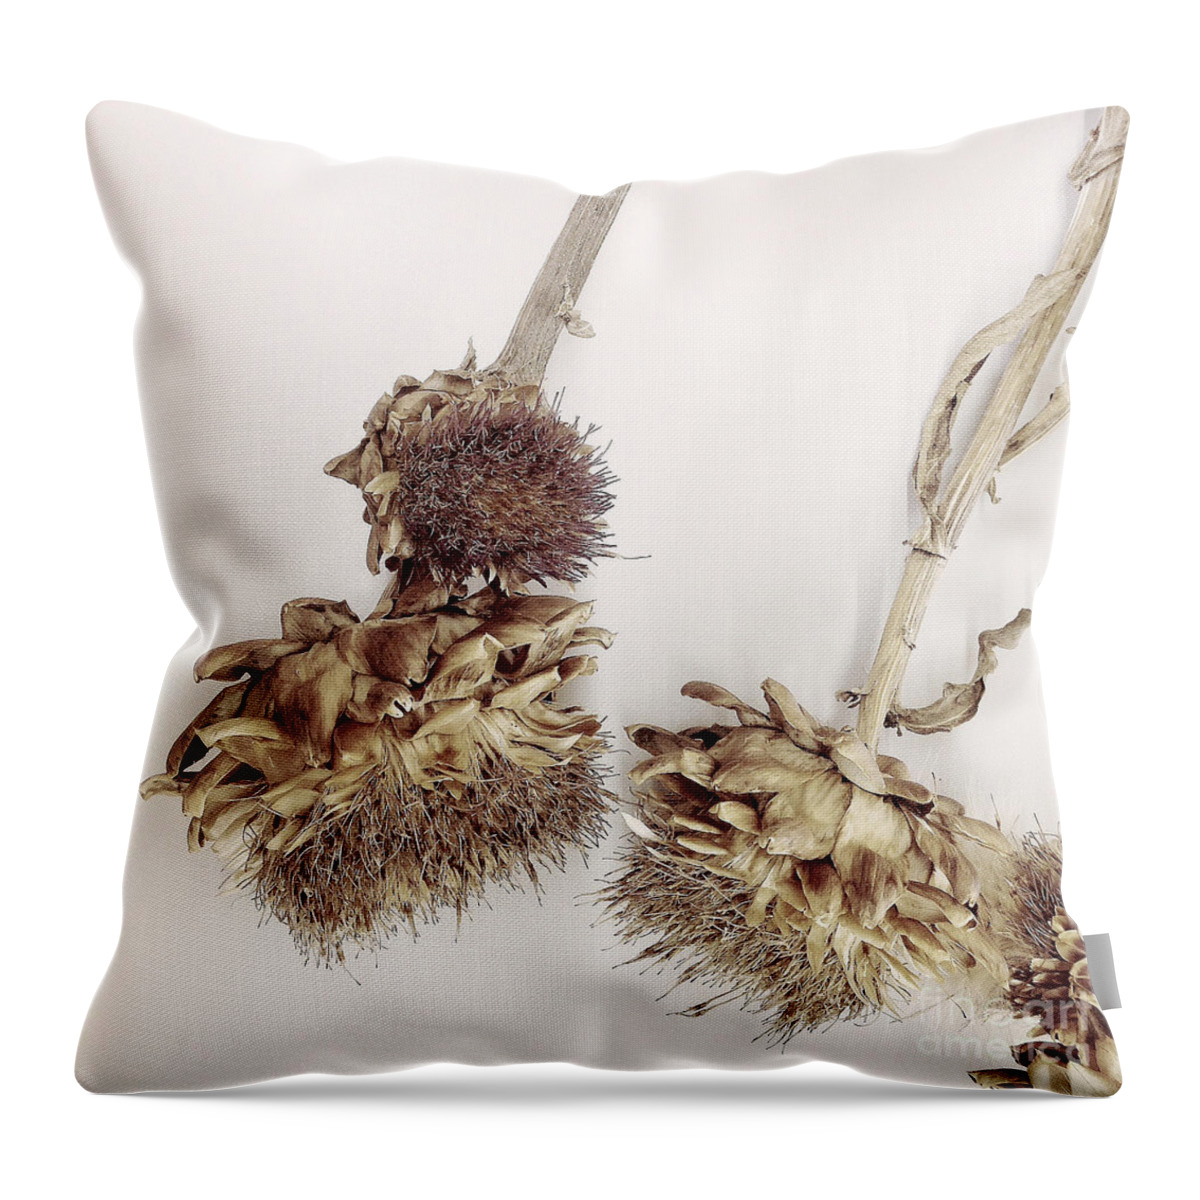 Thistle Throw Pillow featuring the photograph Glasgow by Linda Lees